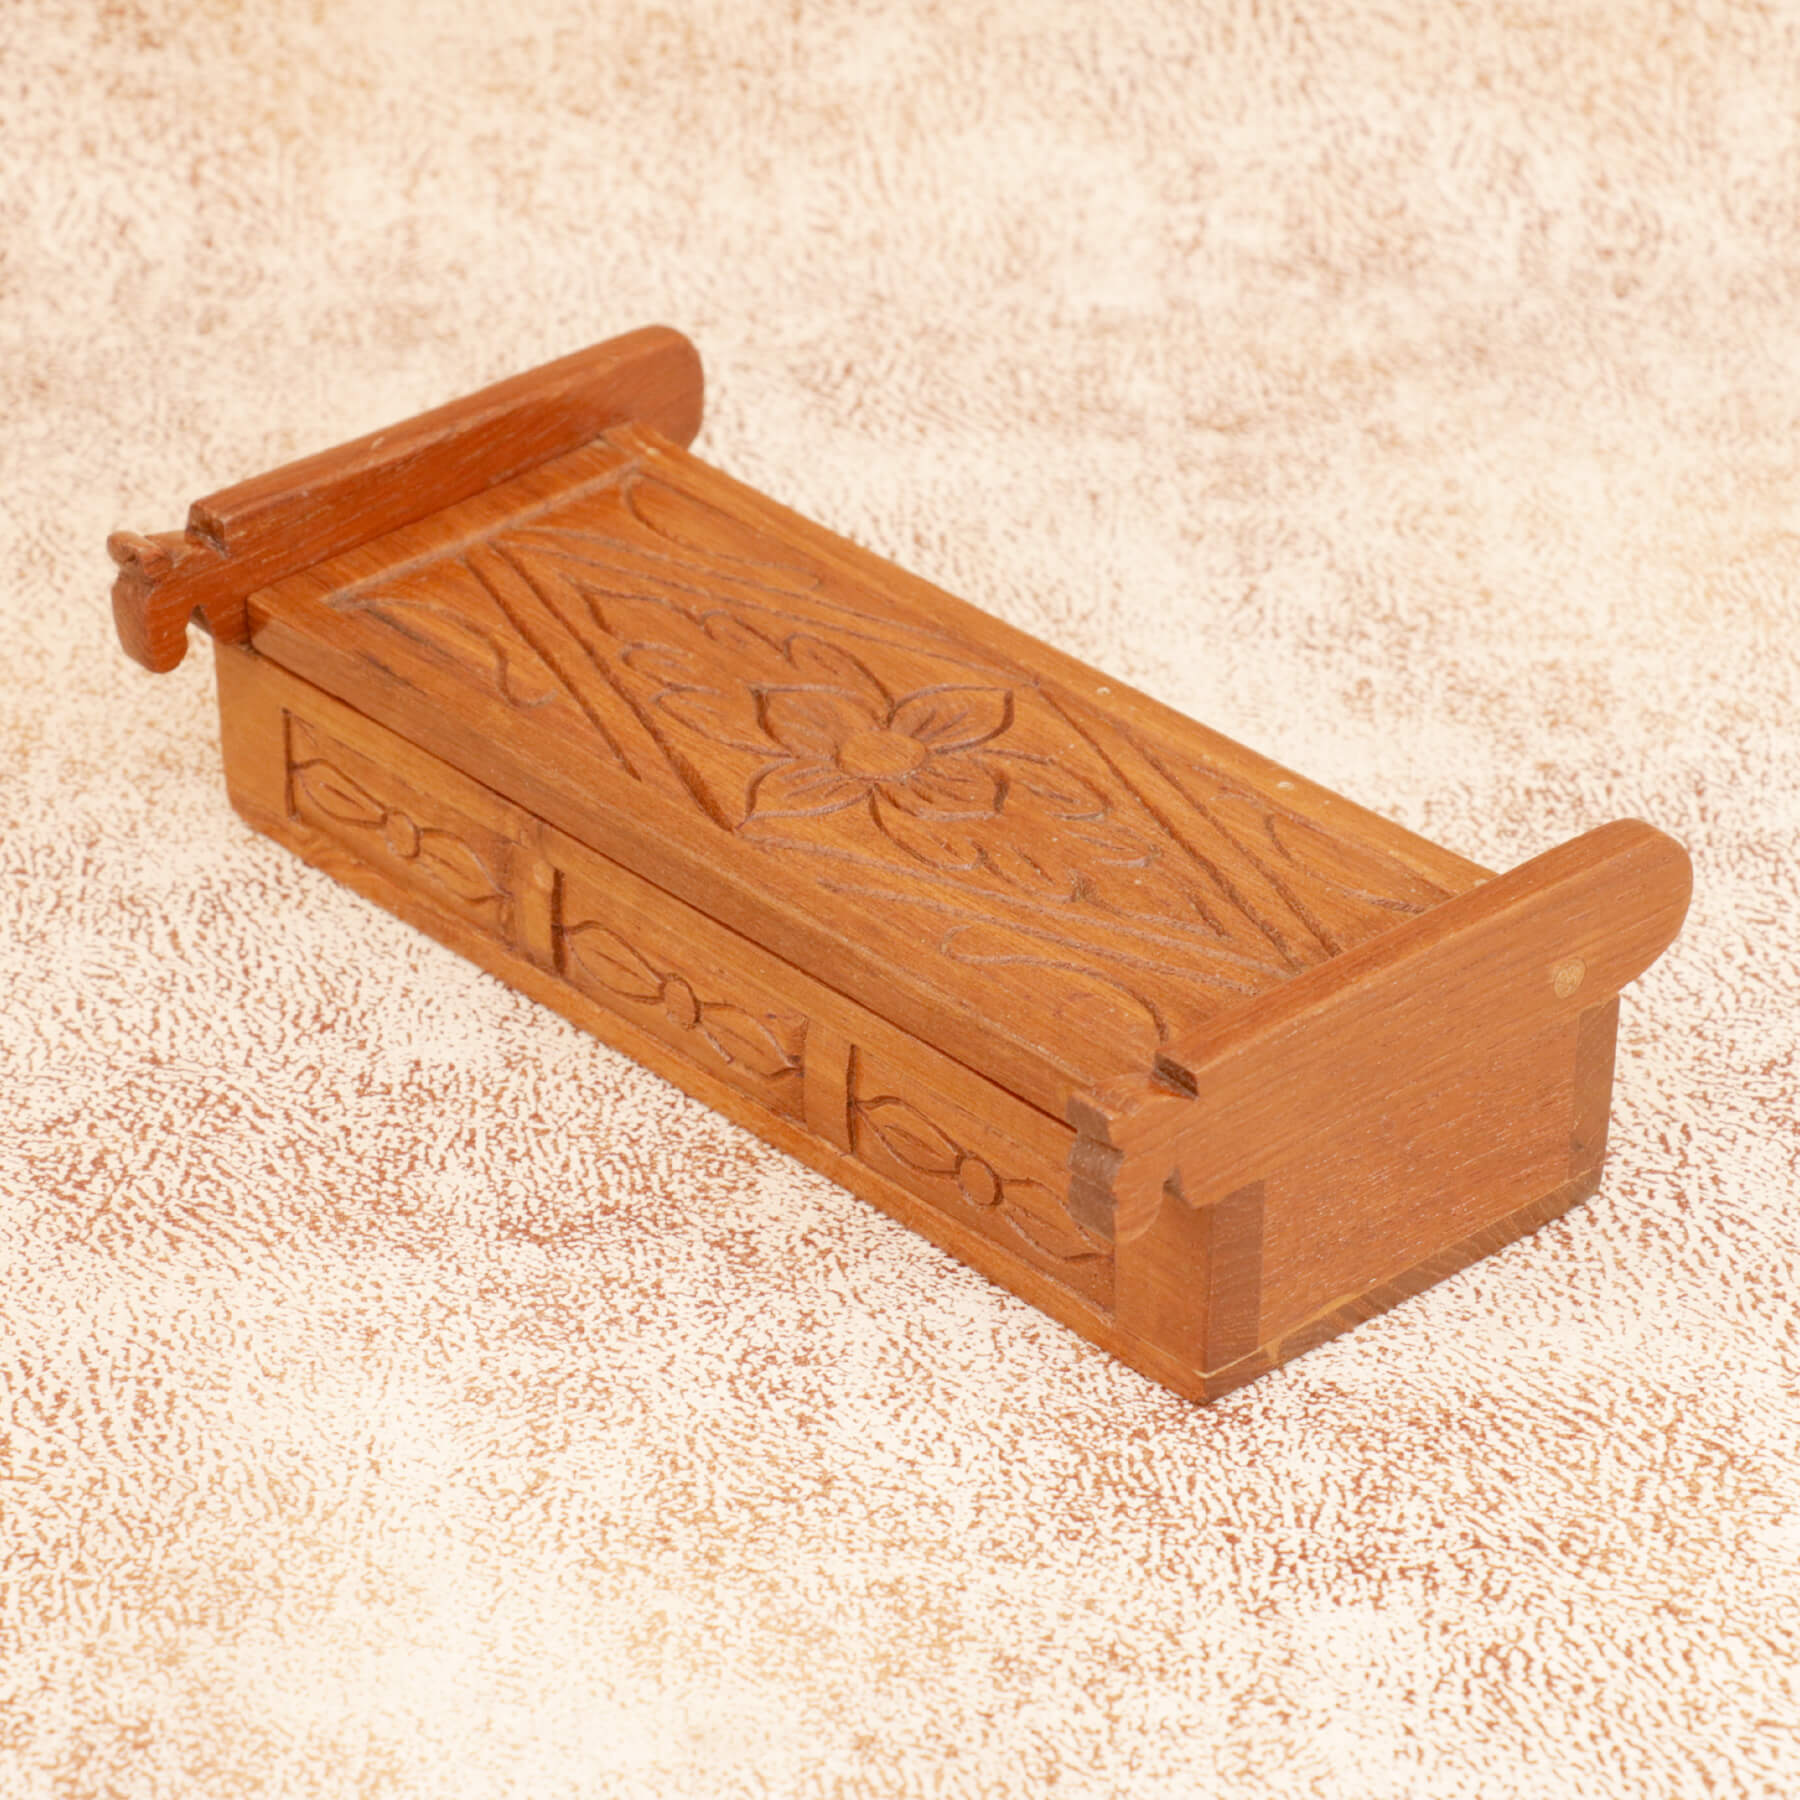 Slim Wooden Carved Box Wooden Box